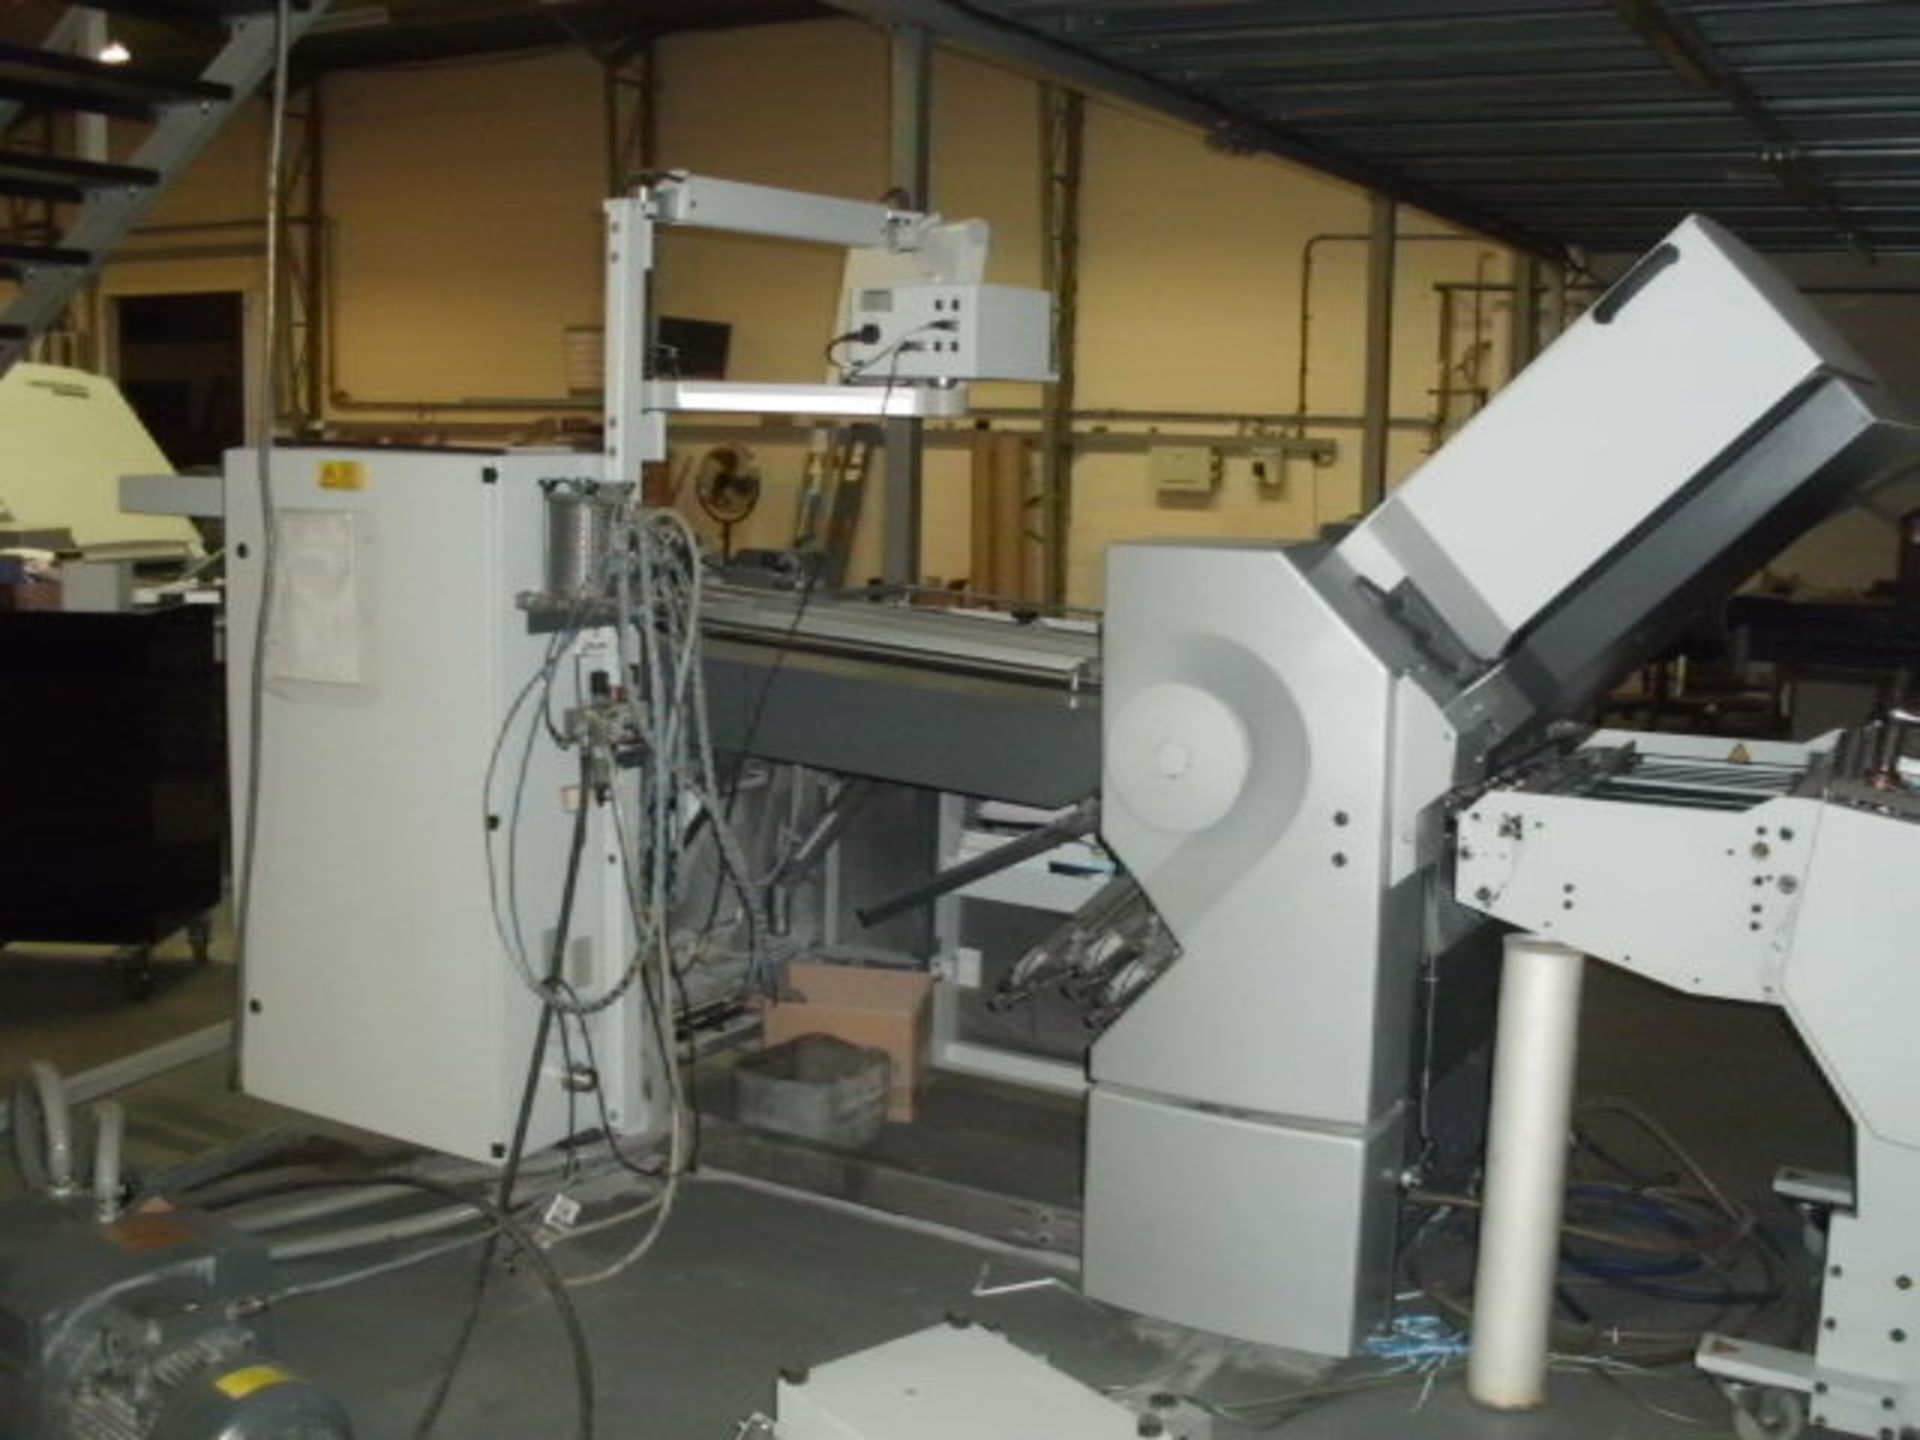 2010 HEIDELBERG STAHLFOLDER model BUH-56-64, product no 1224 431588, serial no FH-E5AA-00582 with - Image 5 of 9